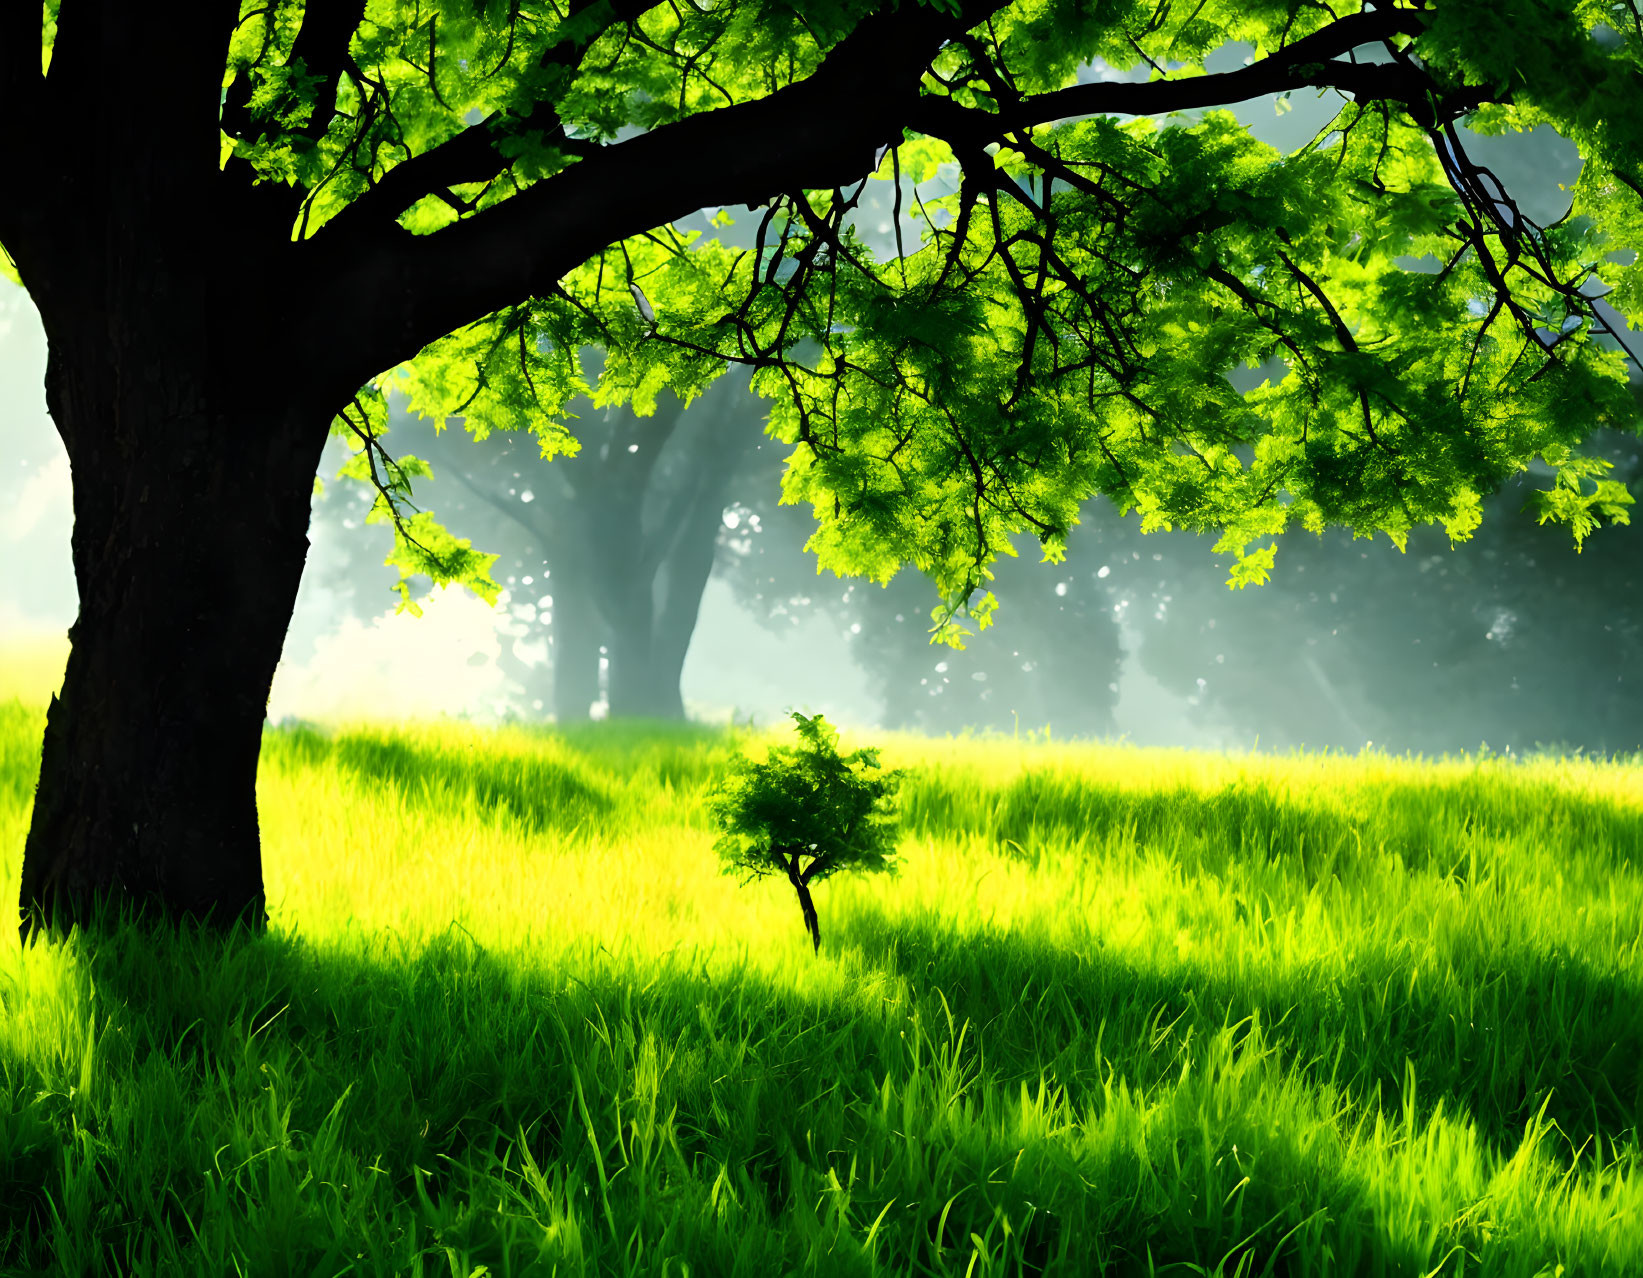 Lush green landscape with small tree and sunlight filtering through trees